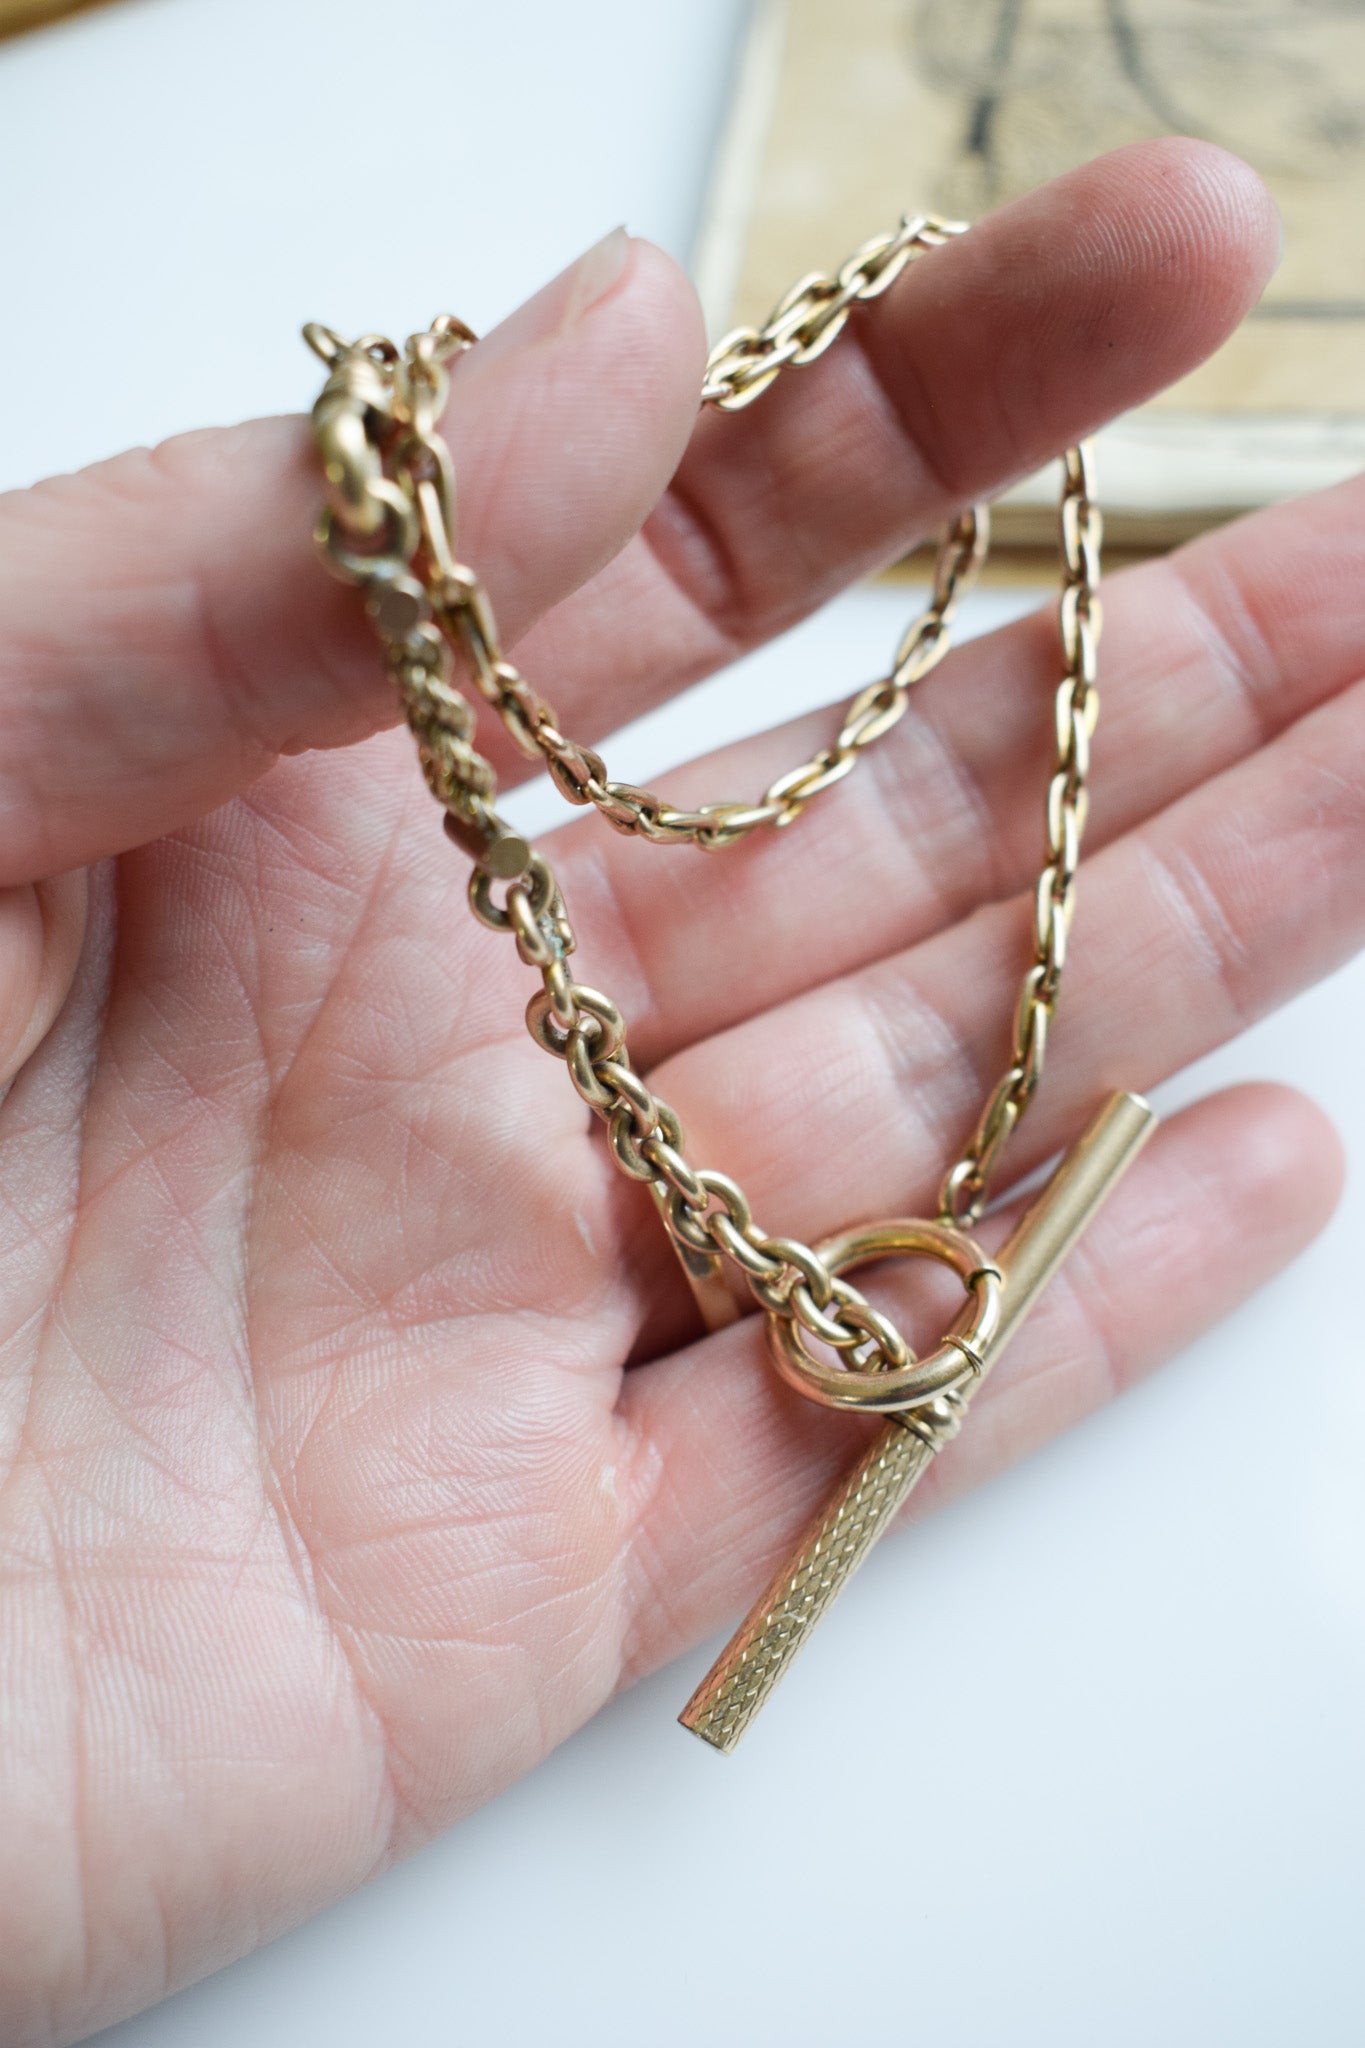 Antique Gold-fill Fob Chain Necklace with T-bar